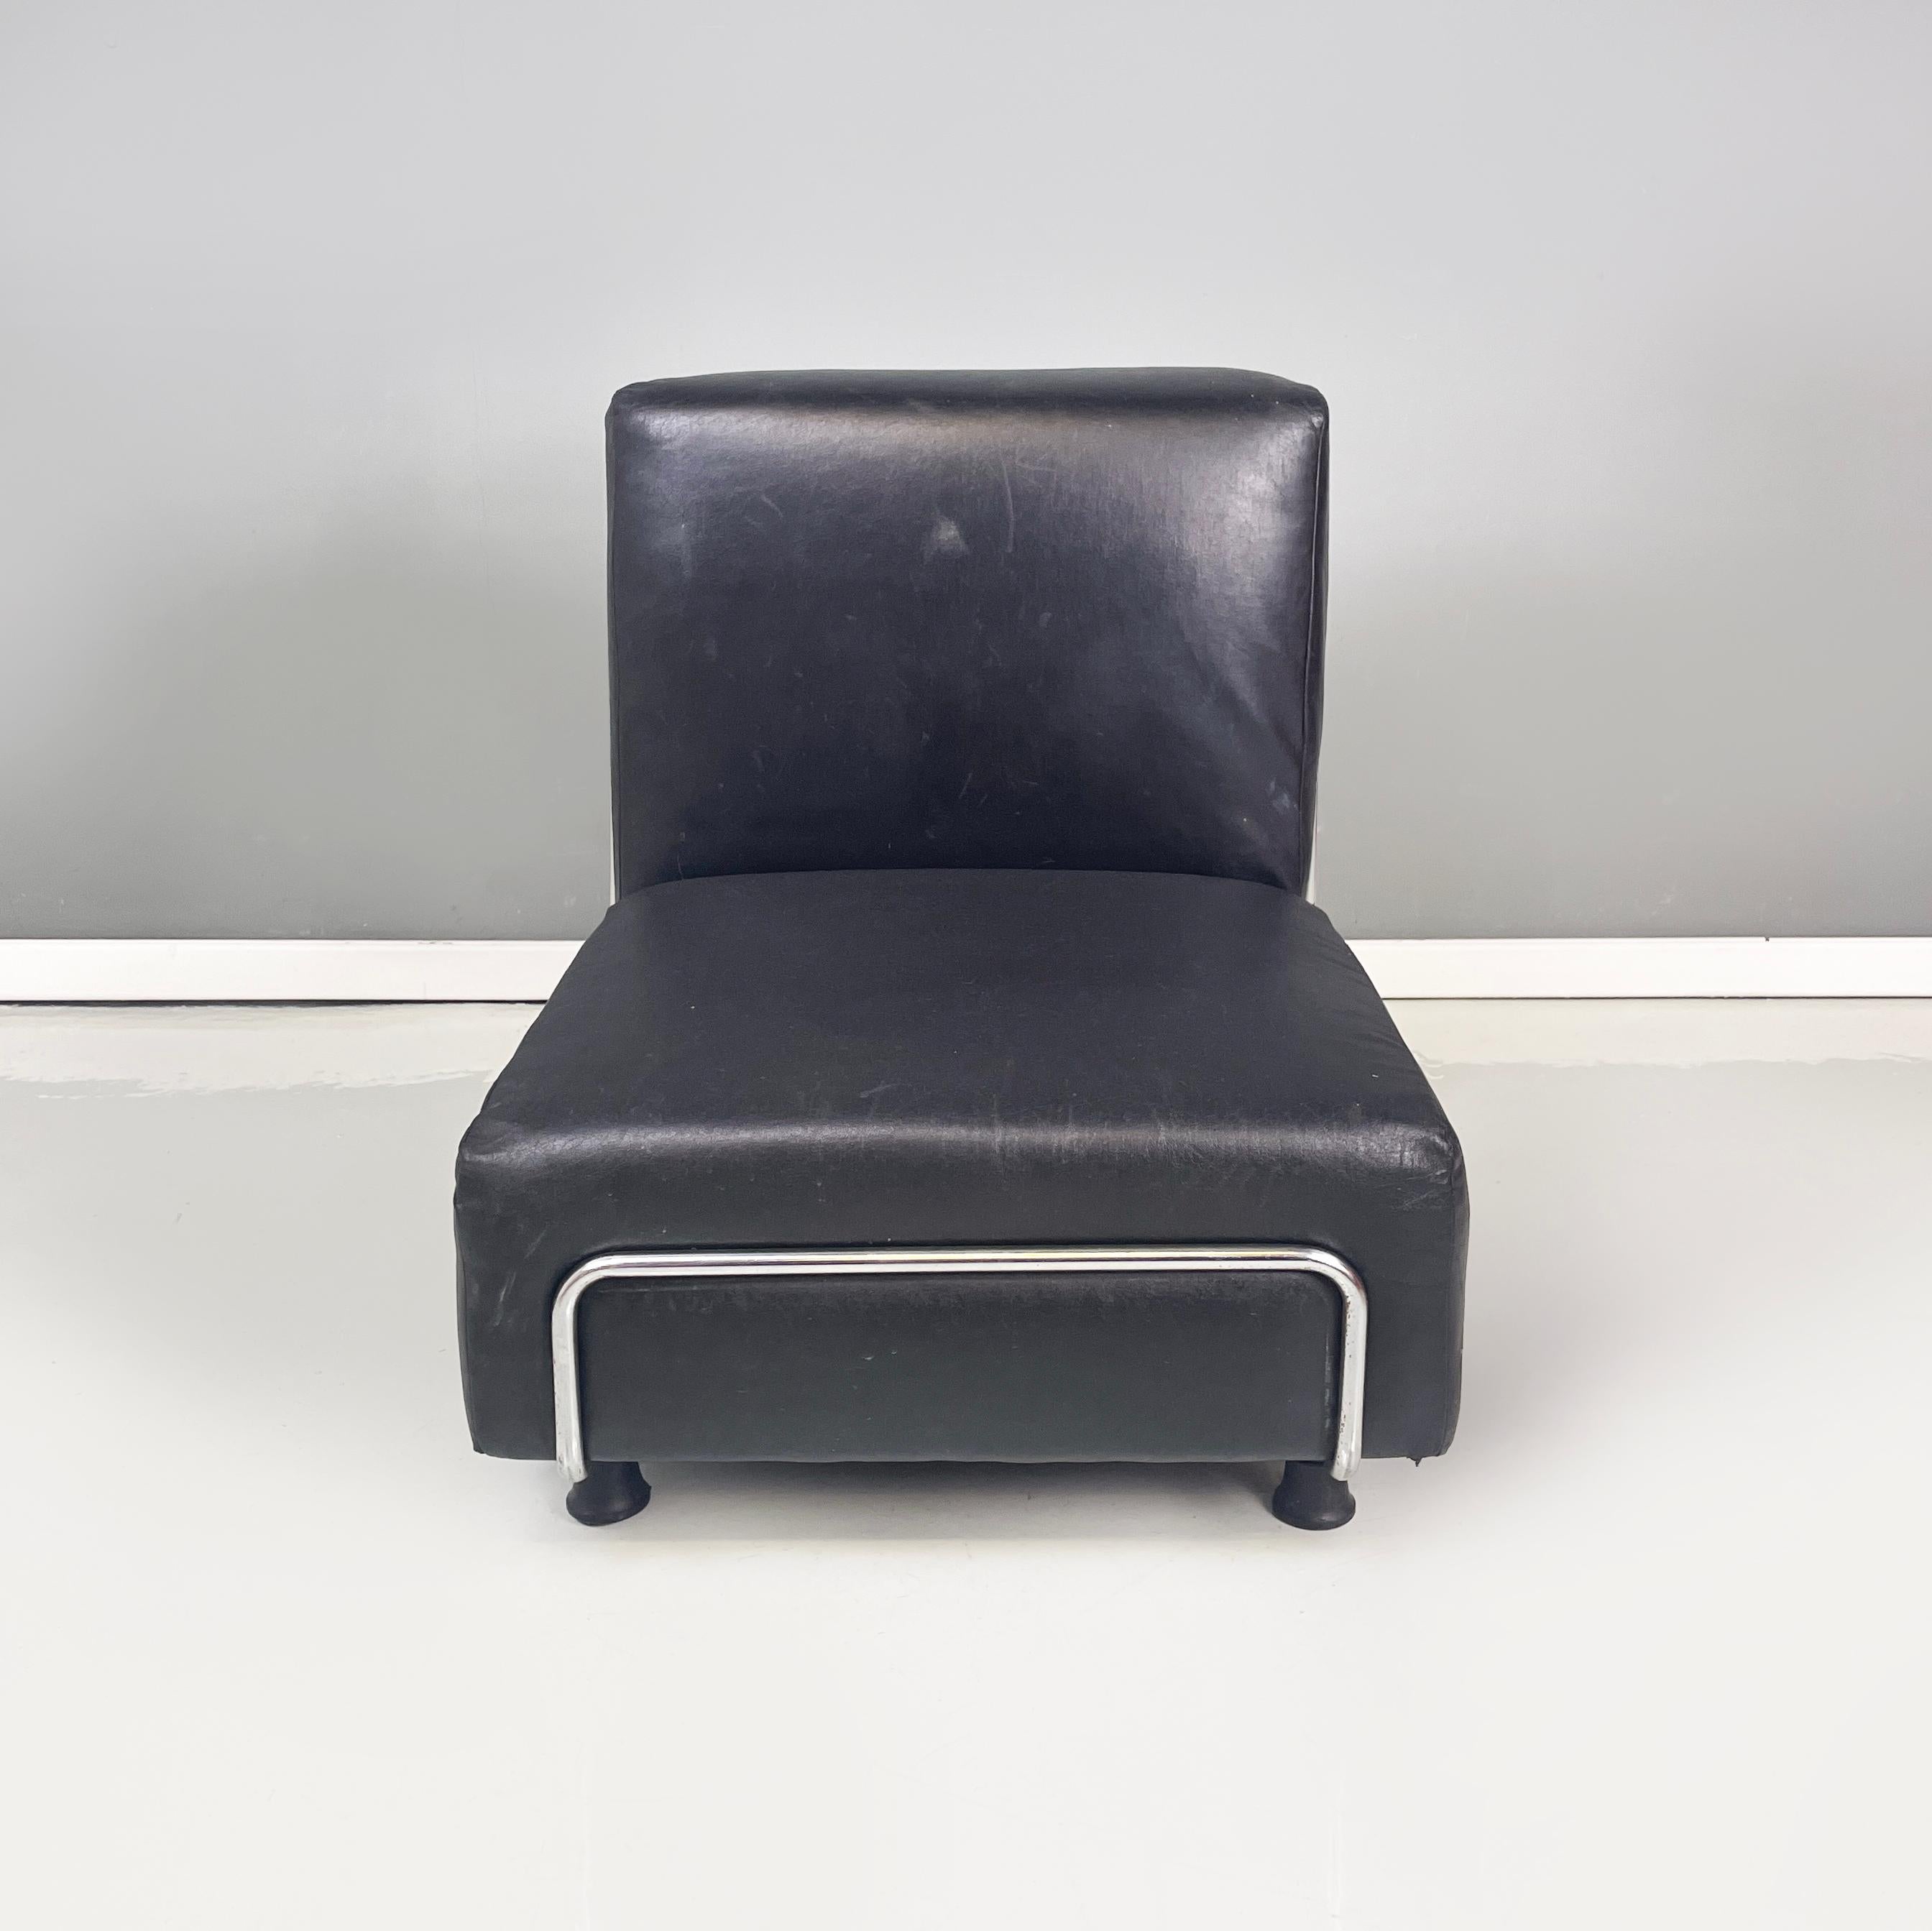 Italian modern Squared armchair in black leather and metal, 1980s
Armchair with squared seat and back, padded and covered in black leather. The structure of the armchair is entirely made of metal rod.
1980 approx.
Vintage condition, the leather